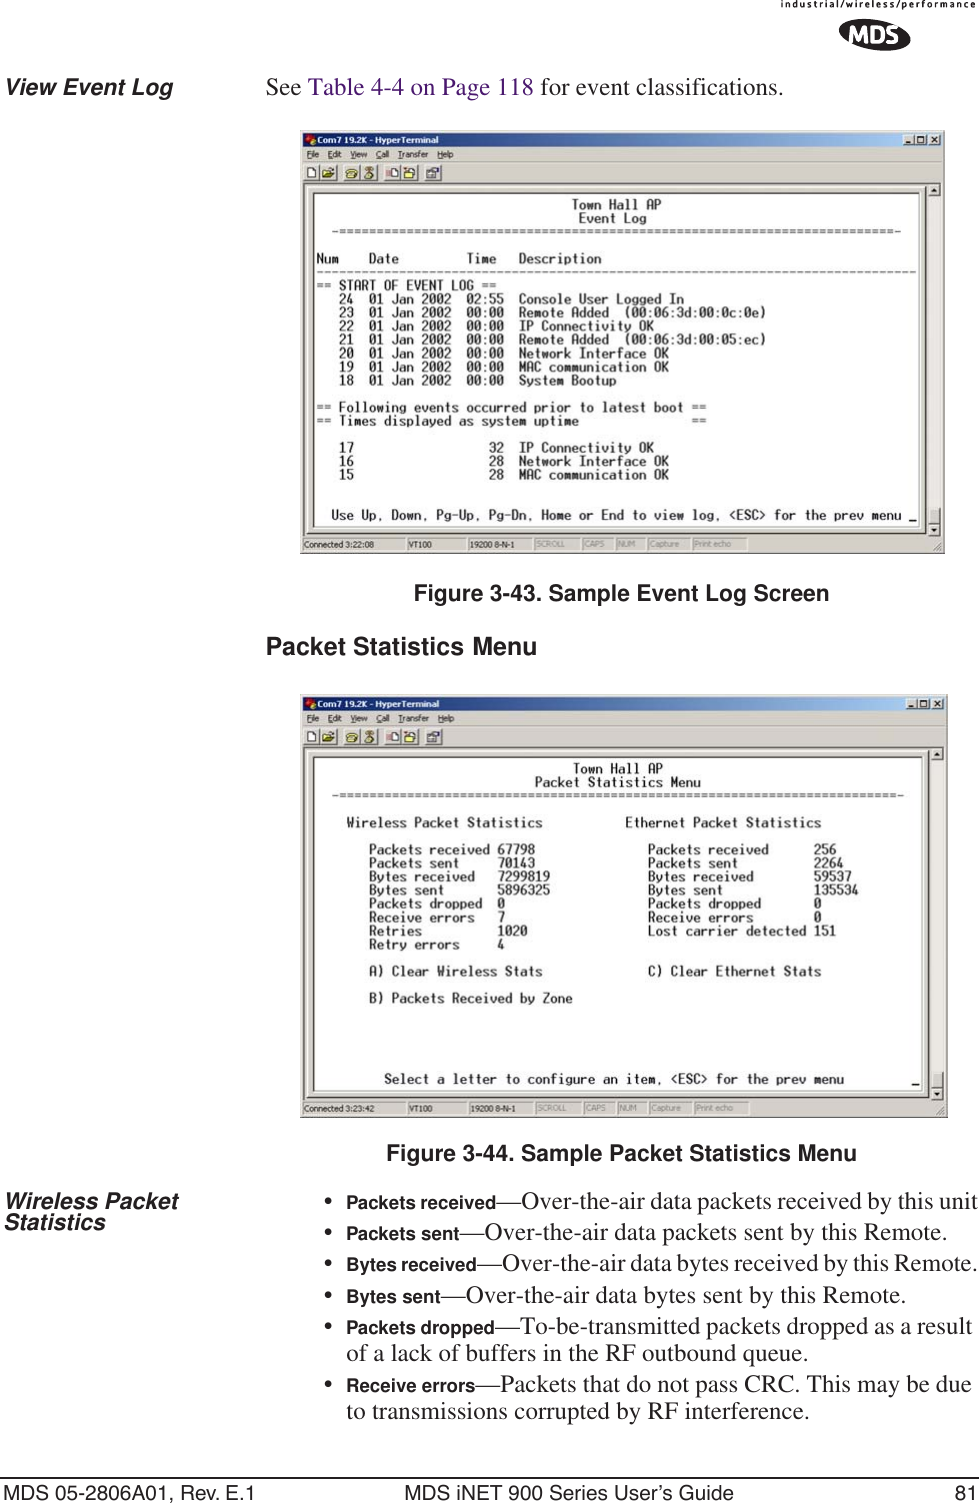 MDS 05-2806A01, Rev. E.1 MDS iNET 900 Series User’s Guide 81View Event Log See Table 4-4 on Page 118 for event classifications.Figure 3-43. Sample Event Log ScreenPacket Statistics Menu Figure 3-44. Sample Packet Statistics MenuWireless Packet Statistics •Packets received—Over-the-air data packets received by this unit•Packets sent—Over-the-air data packets sent by this Remote.•Bytes received—Over-the-air data bytes received by this Remote.•Bytes sent—Over-the-air data bytes sent by this Remote.•Packets dropped—To-be-transmitted packets dropped as a result of a lack of buffers in the RF outbound queue.•Receive errors—Packets that do not pass CRC. This may be due to transmissions corrupted by RF interference.